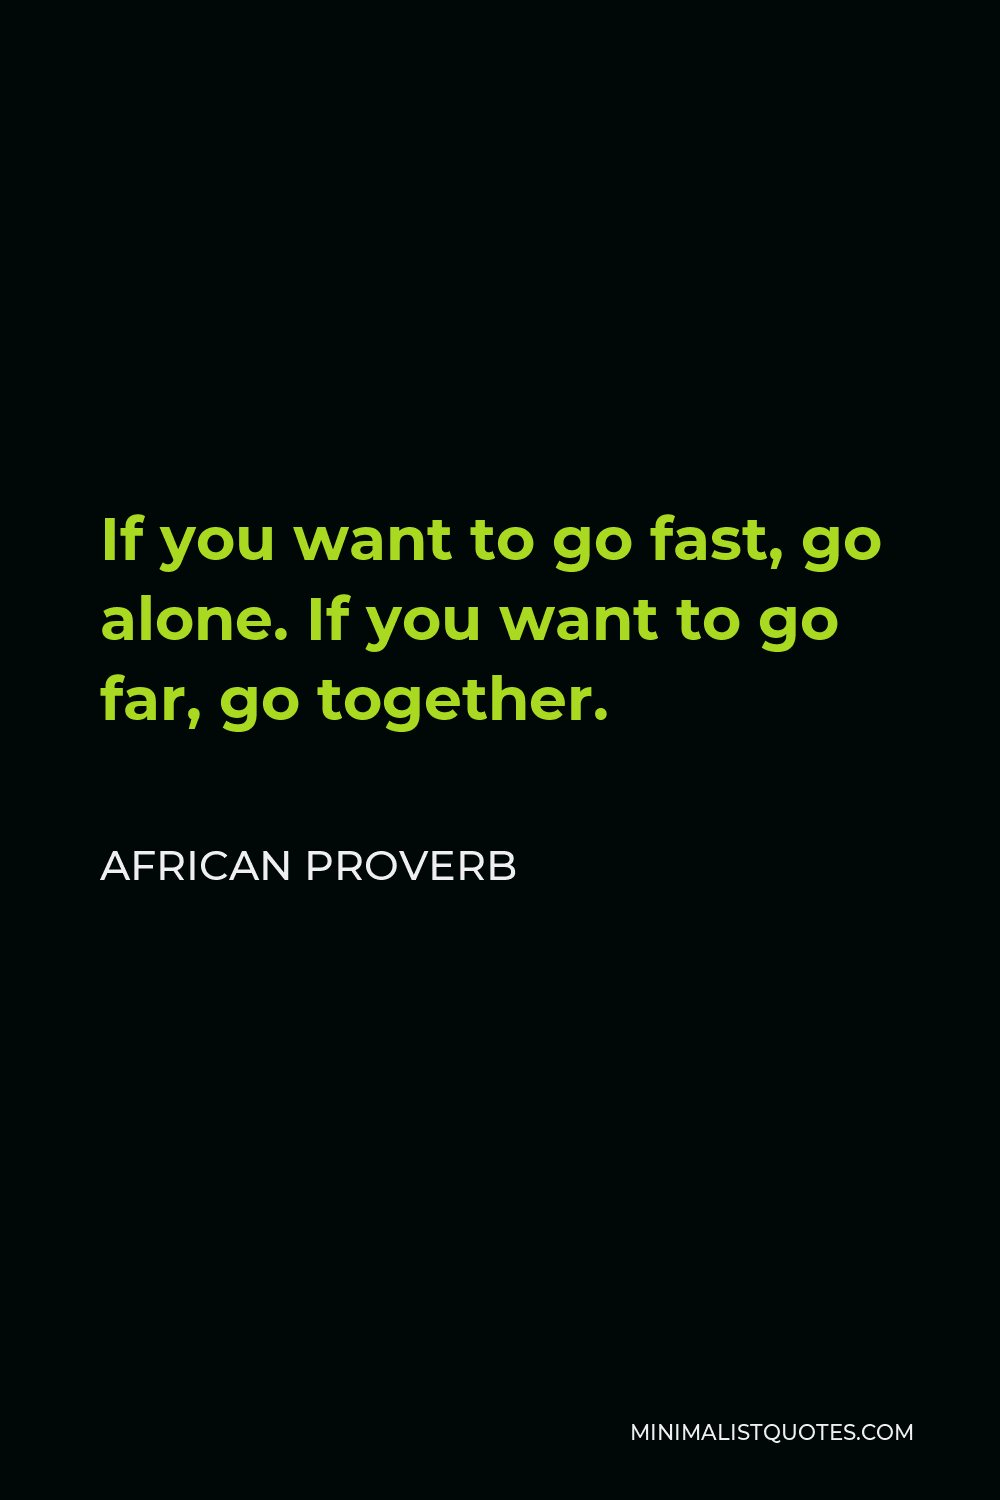 African Proverb Quote - If you want to go fast, go alone. If you want to go far, go together.